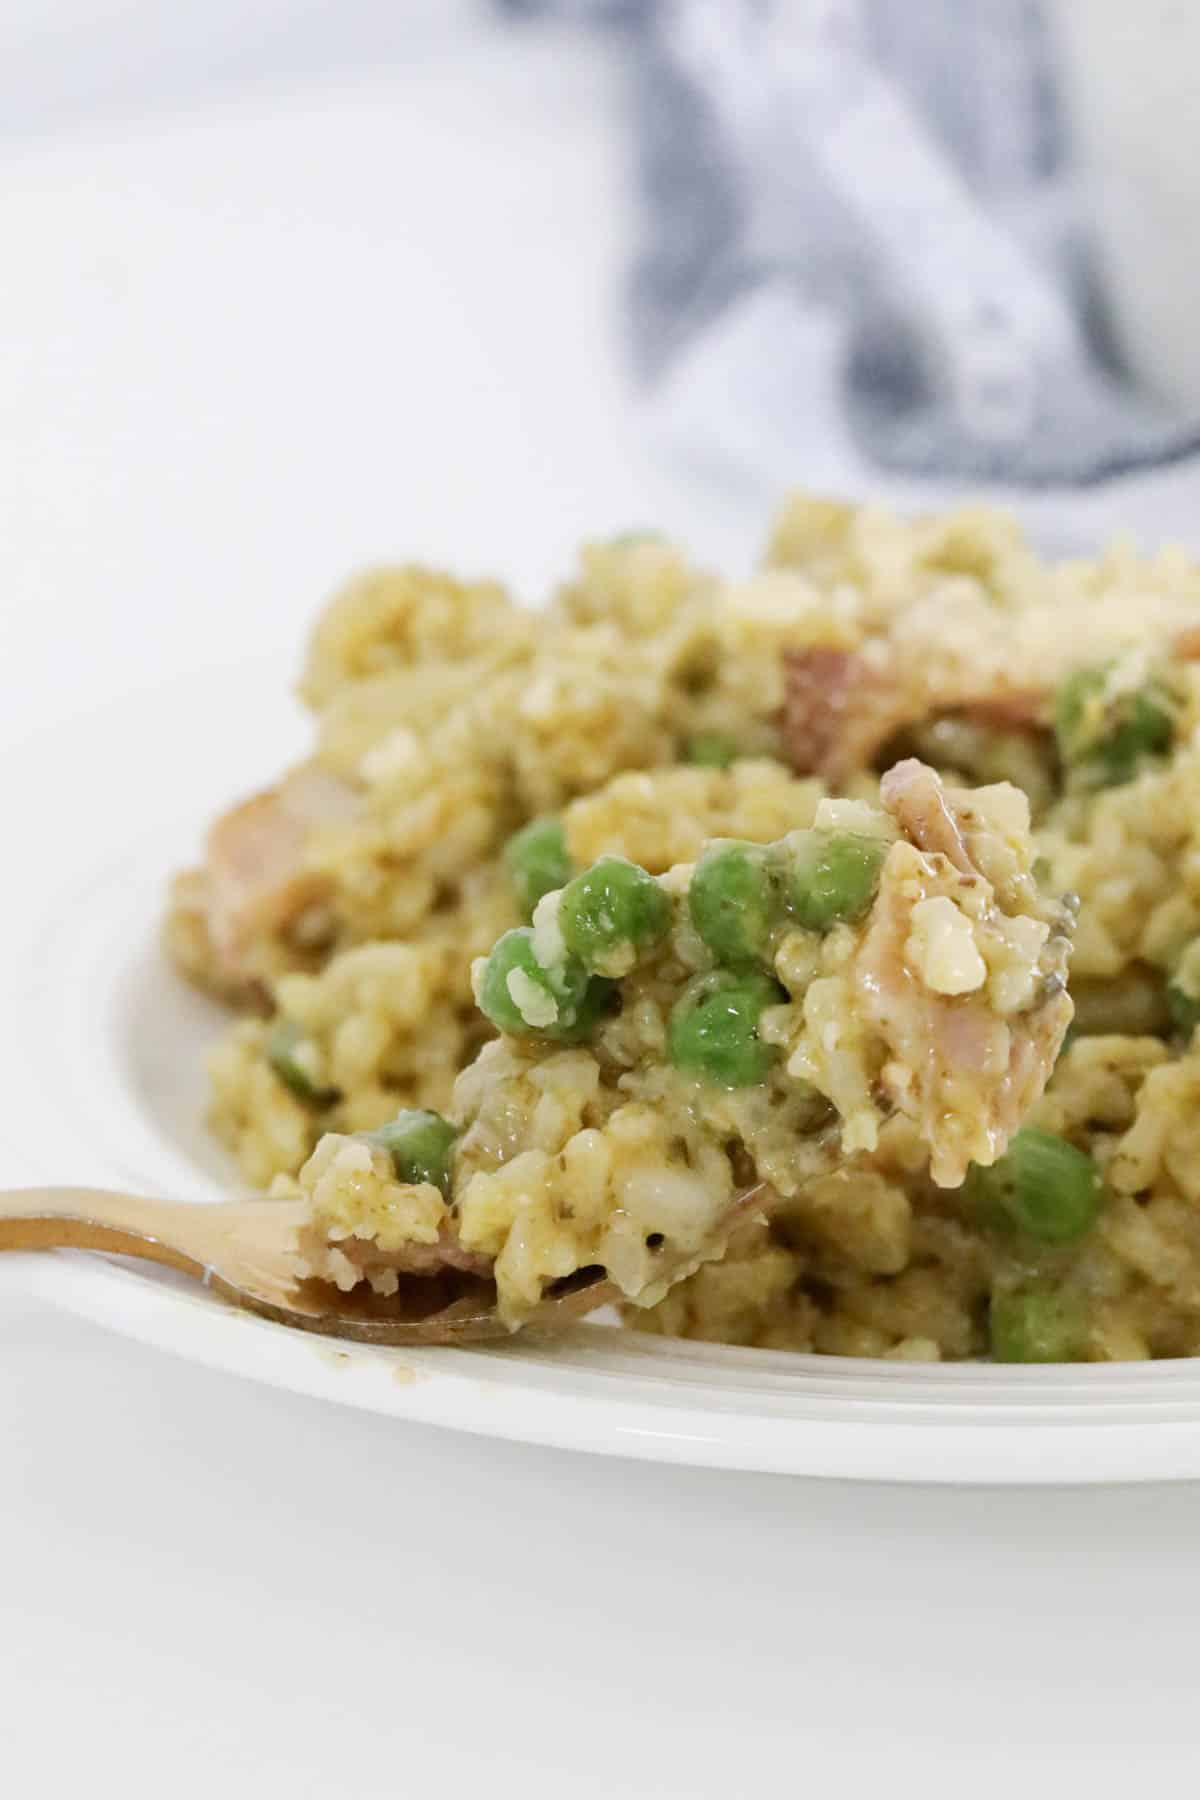 A fork holding up a forkful of the bacon and pea risotto.